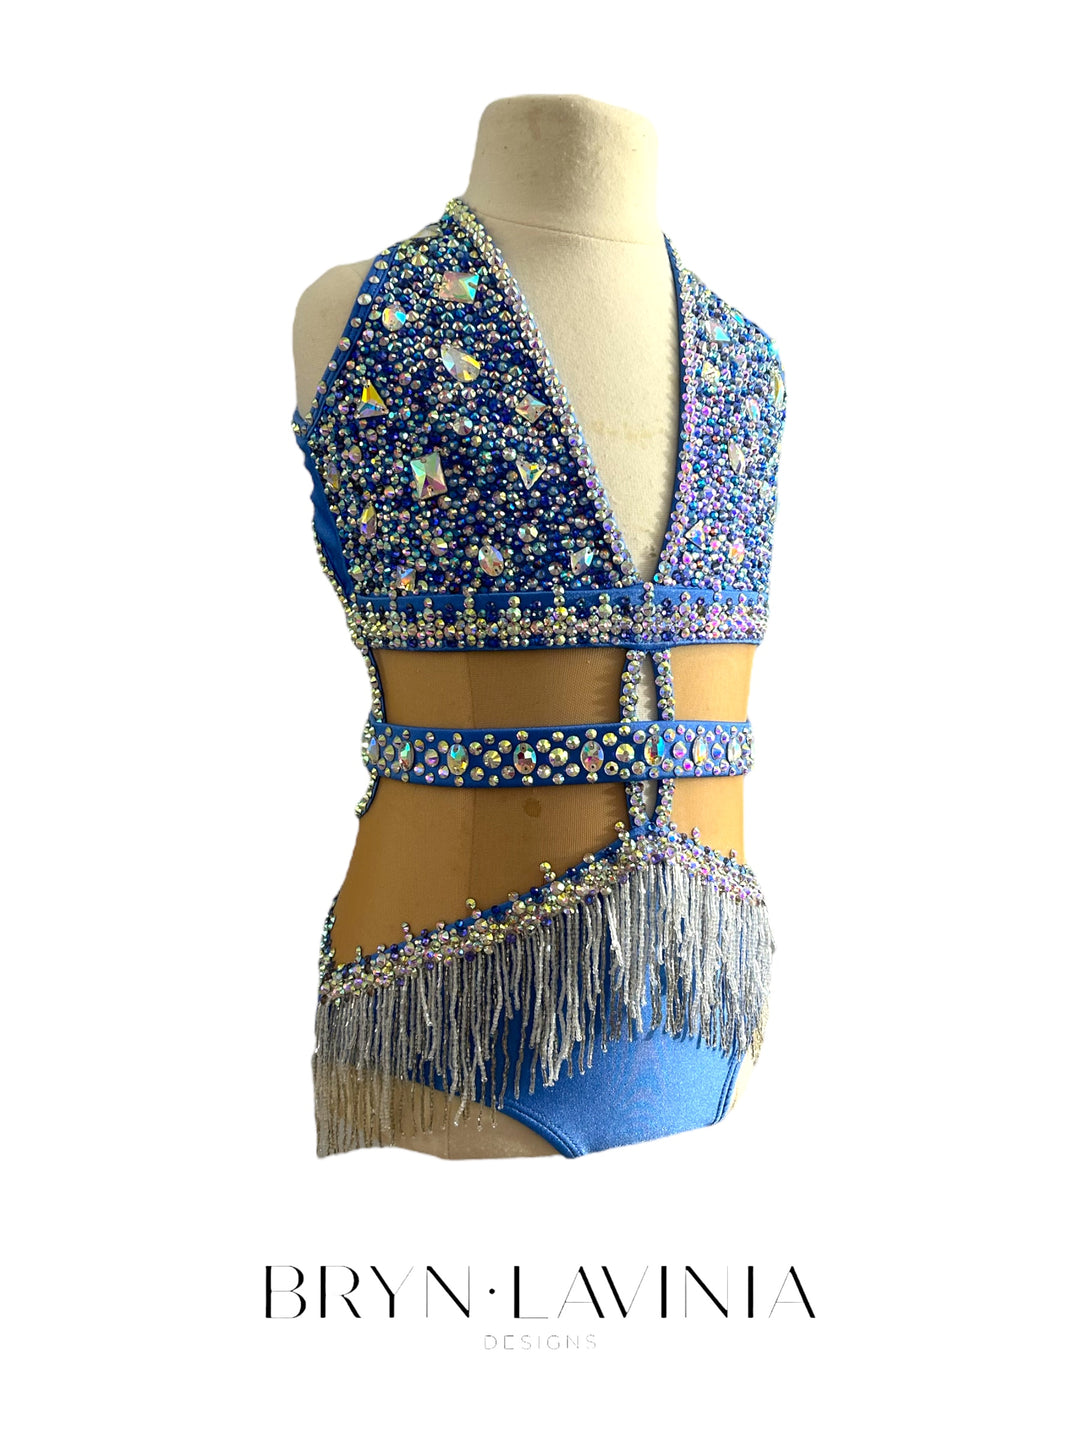 NEW CXL periwinkle ready to ship costume